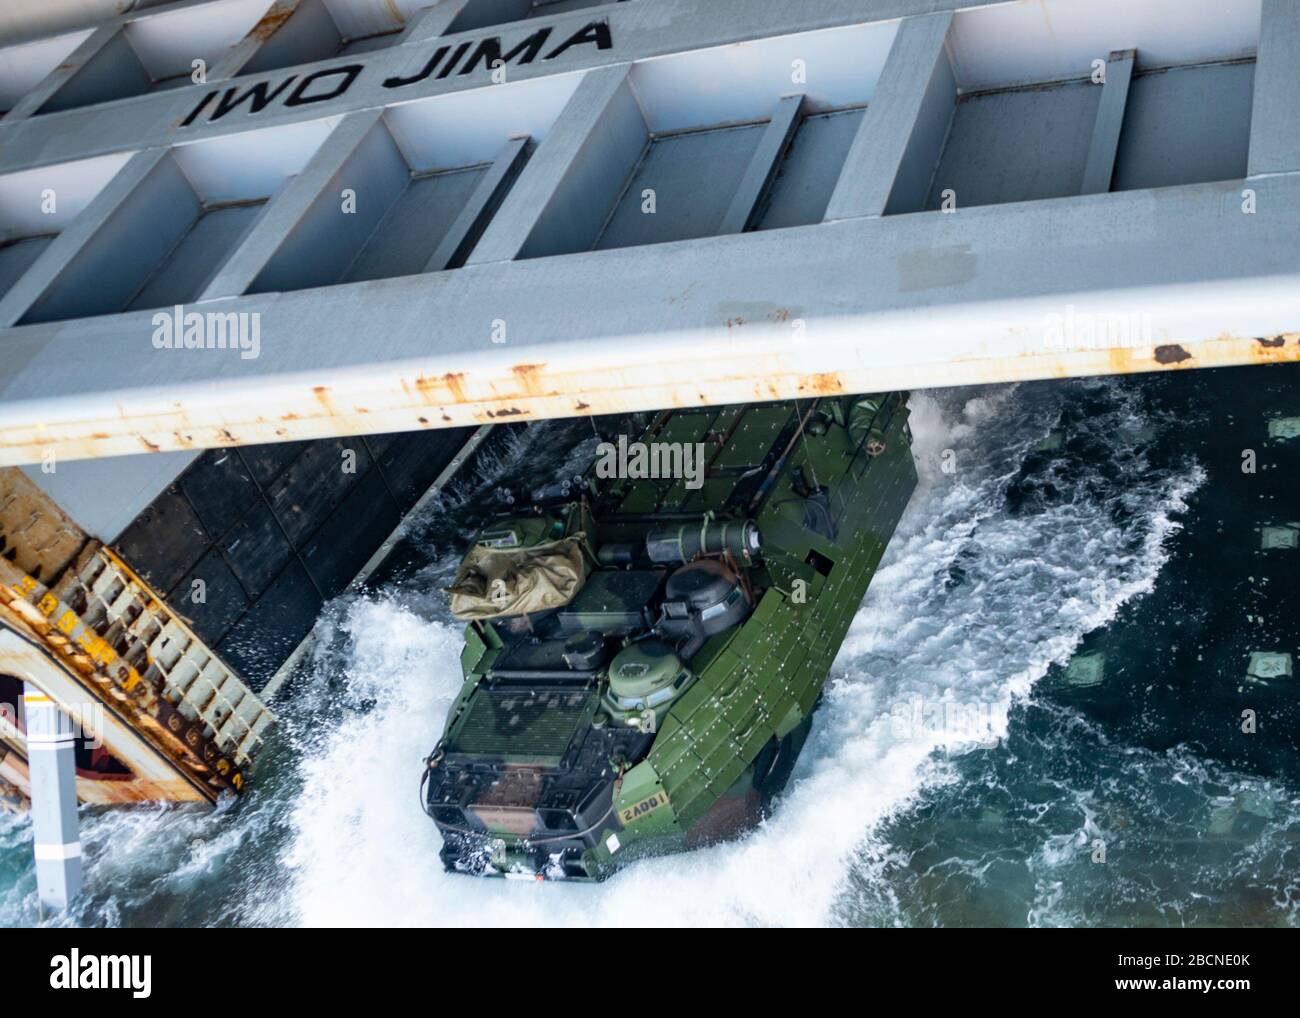 ONSLOW BAY, N.C. (March 18, 2020) – An Amphibious Assault Vehicle (AAV) assigned to 2nd Assault Amphibian Battalion (2nd AABN), 2nd Marine Division based out of Camp Lejeune, N.C. launches off the well deck onboard the Wasp-class amphibious assault ship USS Iwo Jima (LHD 7), March 18, 2020. Iwo Jima and the 2nd AABN are conducting amphibious assault operations certification in the Atlantic Ocean. (U.S. Navy photo by Mass Communications Specialist 3rd Class Jessica Kibena/Released) Stock Photo